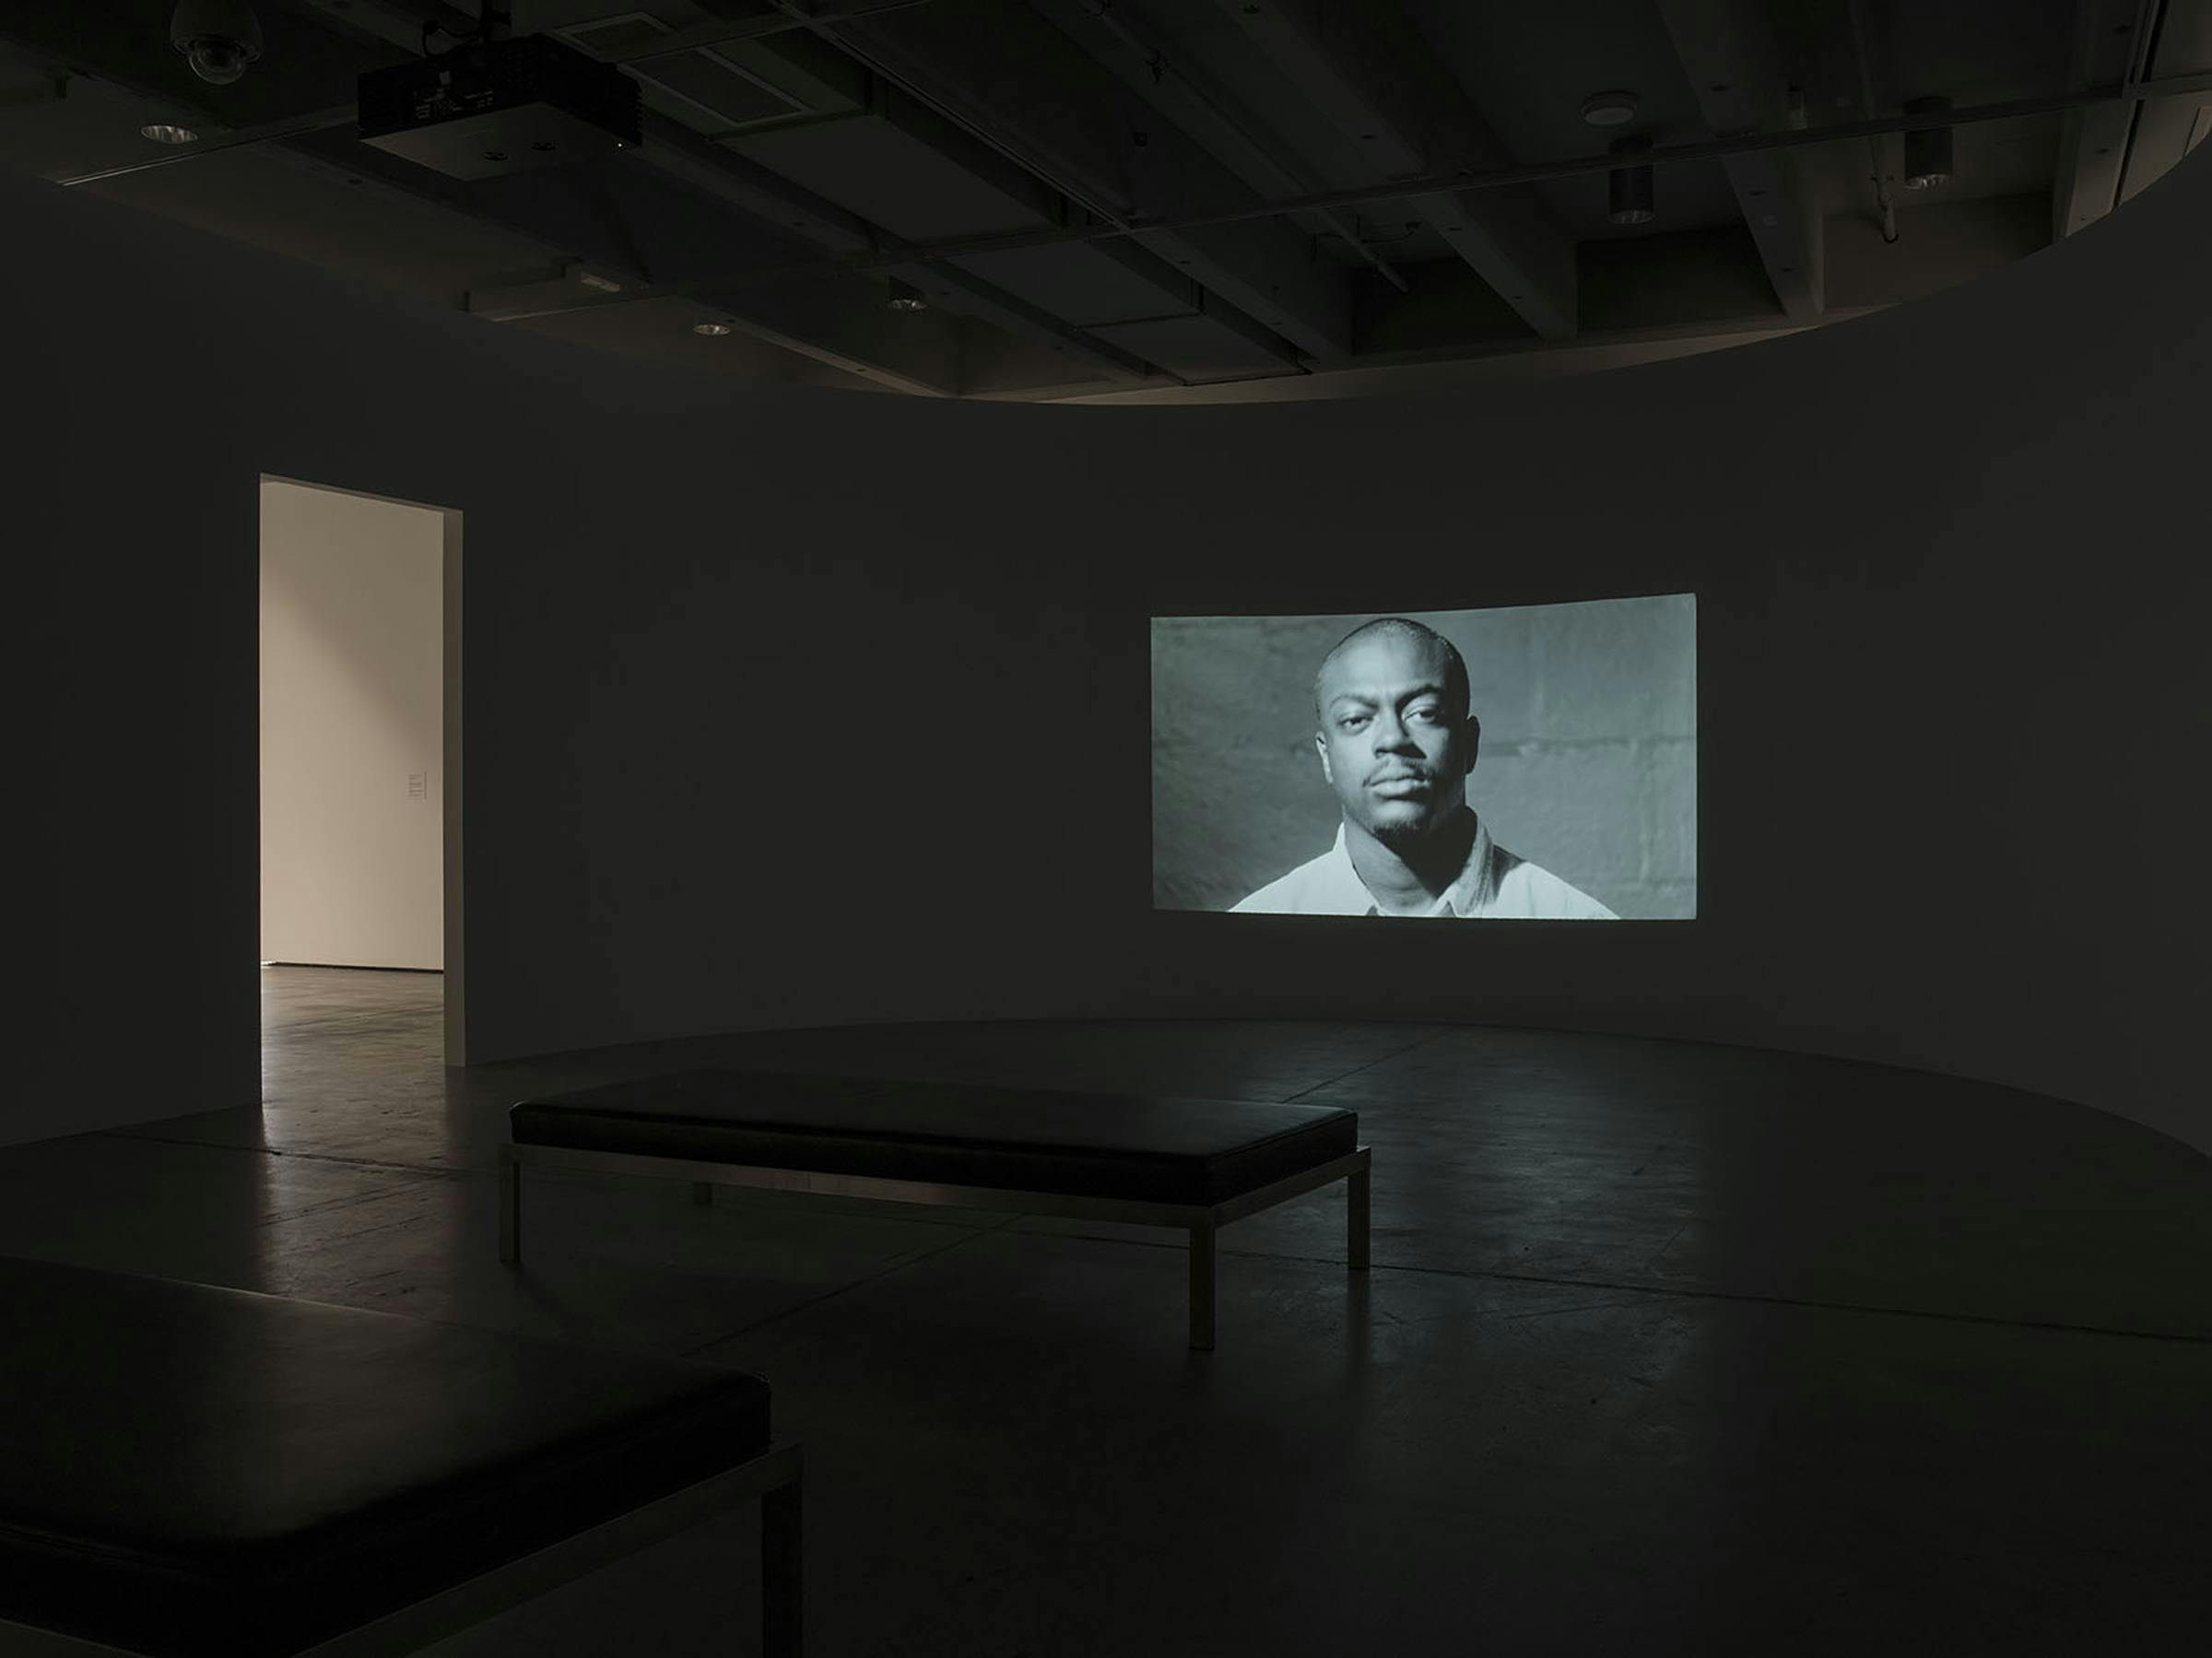 Image of an empty gallery space with large projection on one wall, a bench, and an archway.